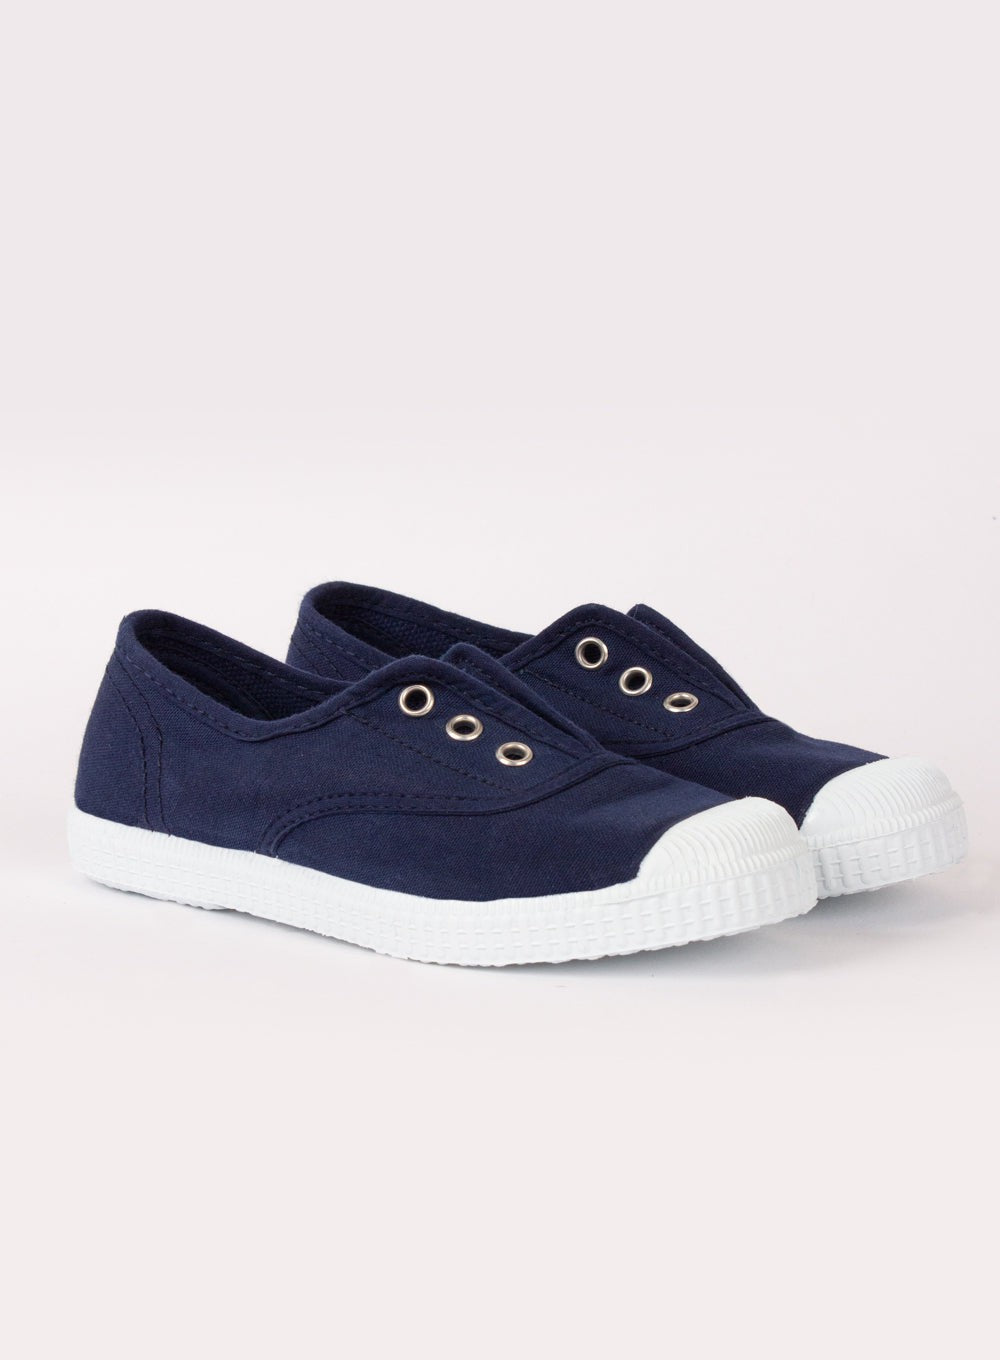 Hampton Canvas Plum Plimsolls in Navy | Kid's Shoes From Trotters